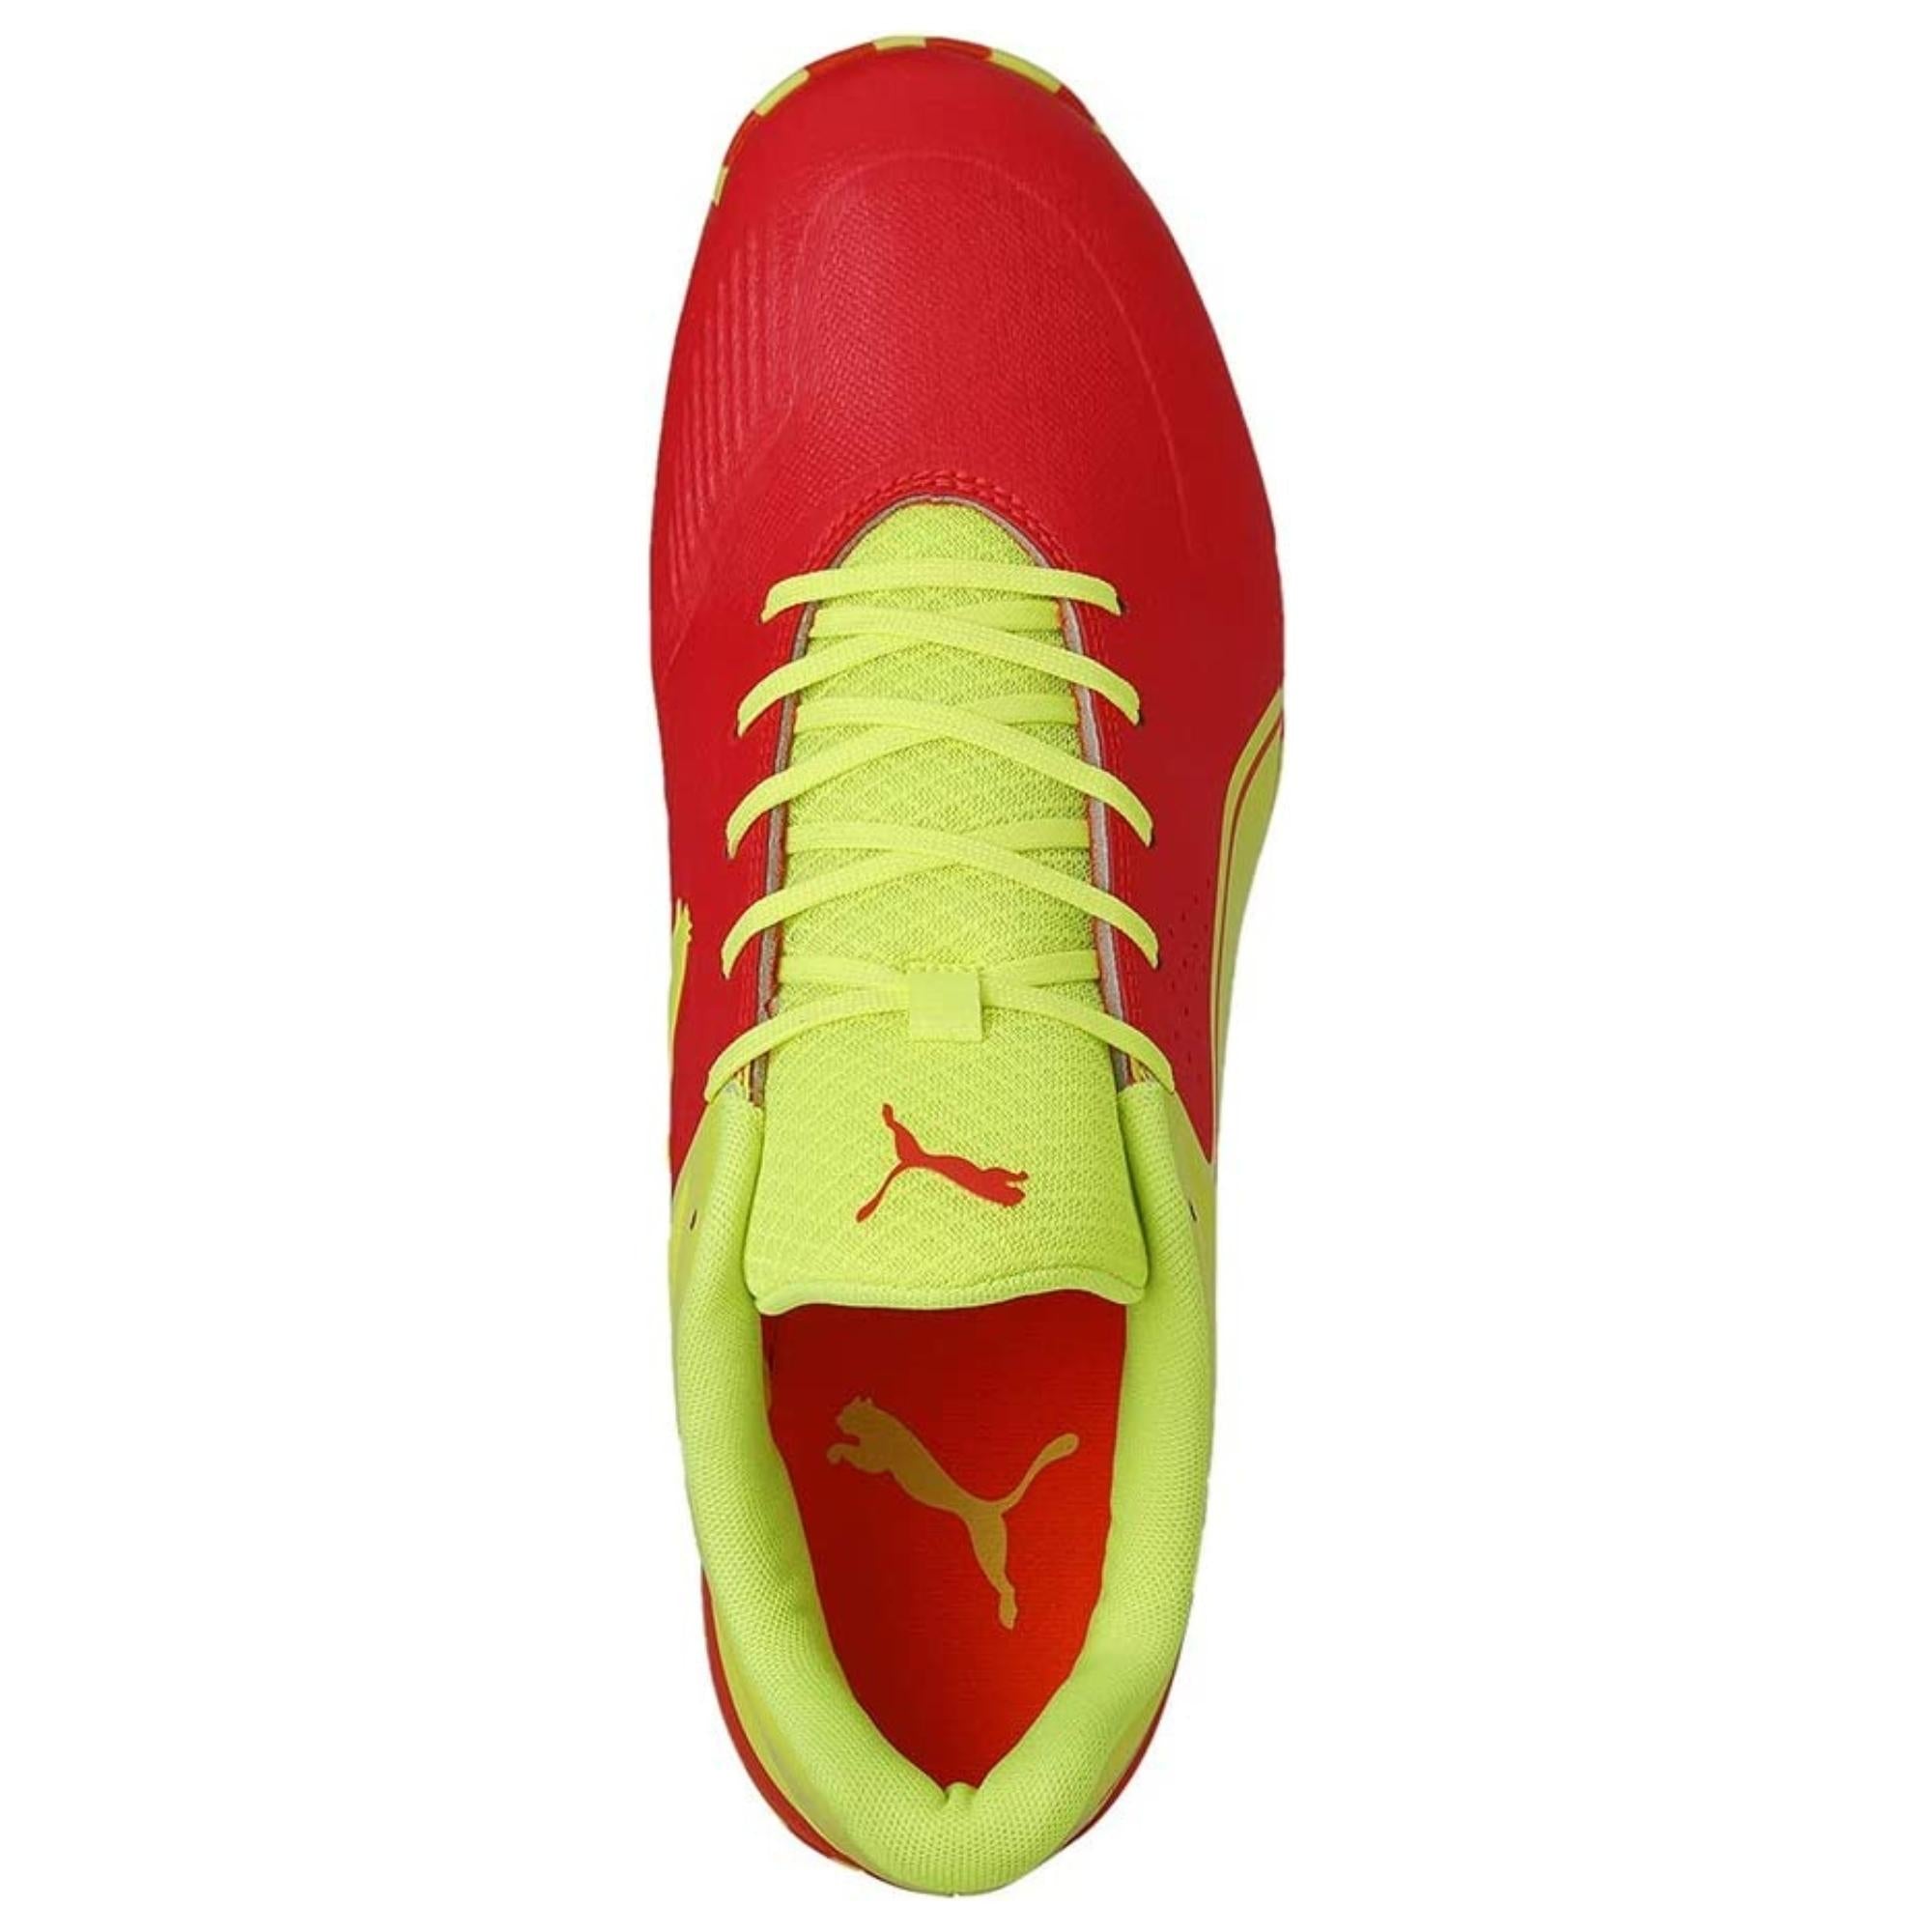 Puma Cricket Shoes One 8, Red/Yellow